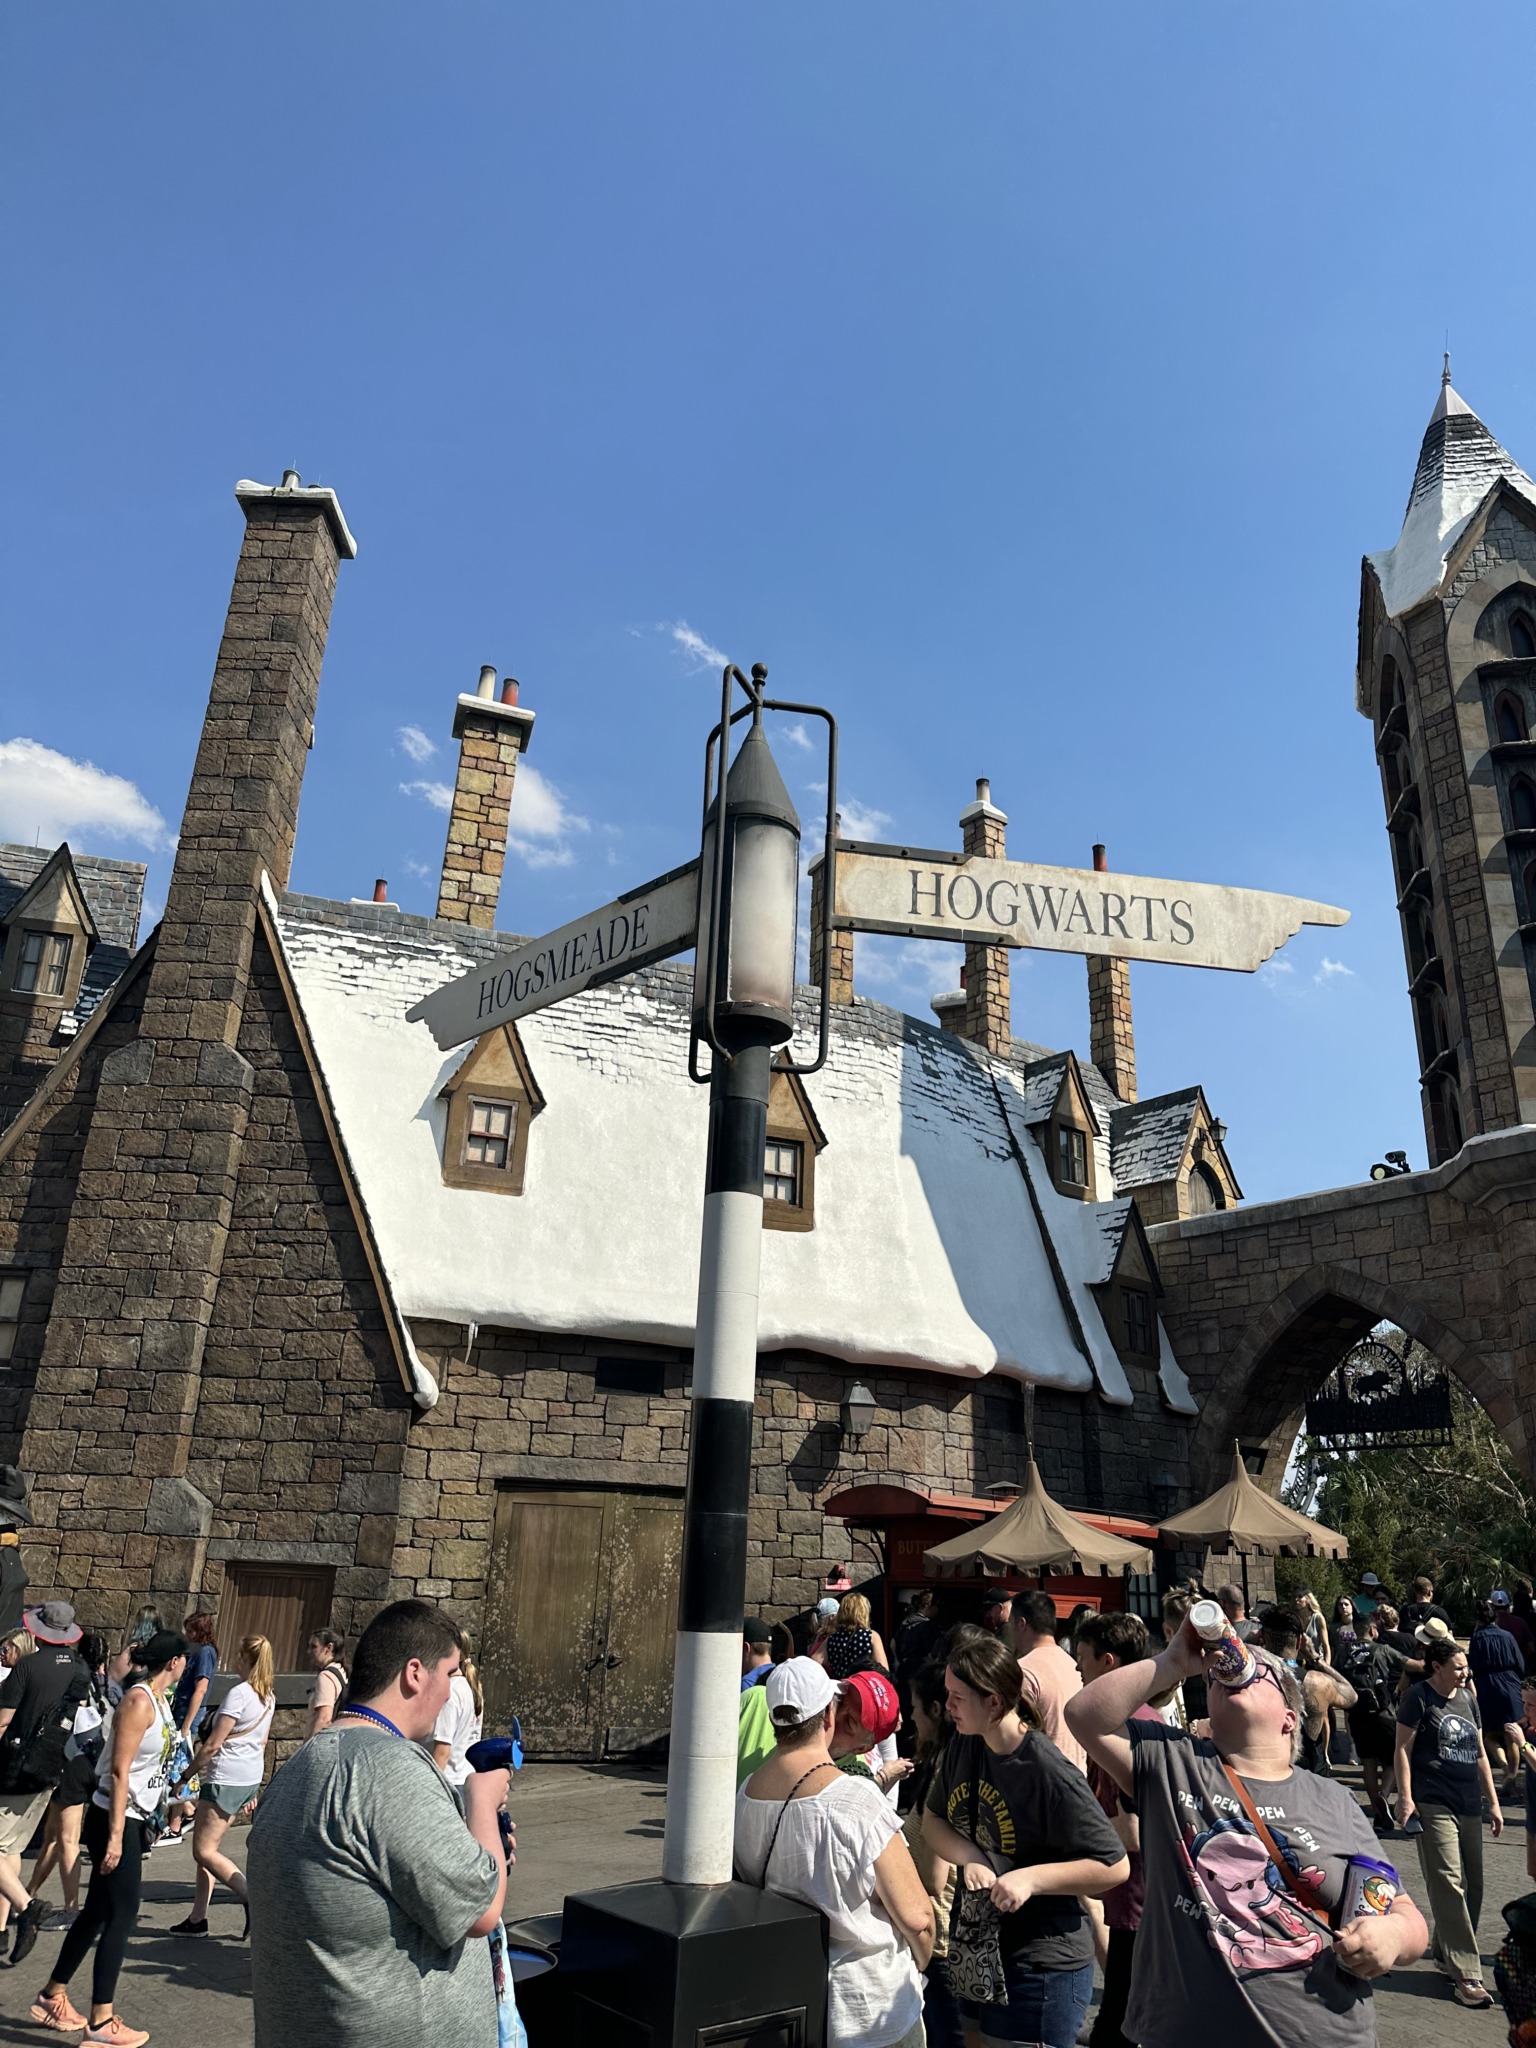 Planning Your First Visit to Wizarding World of Harry Potter Orlando